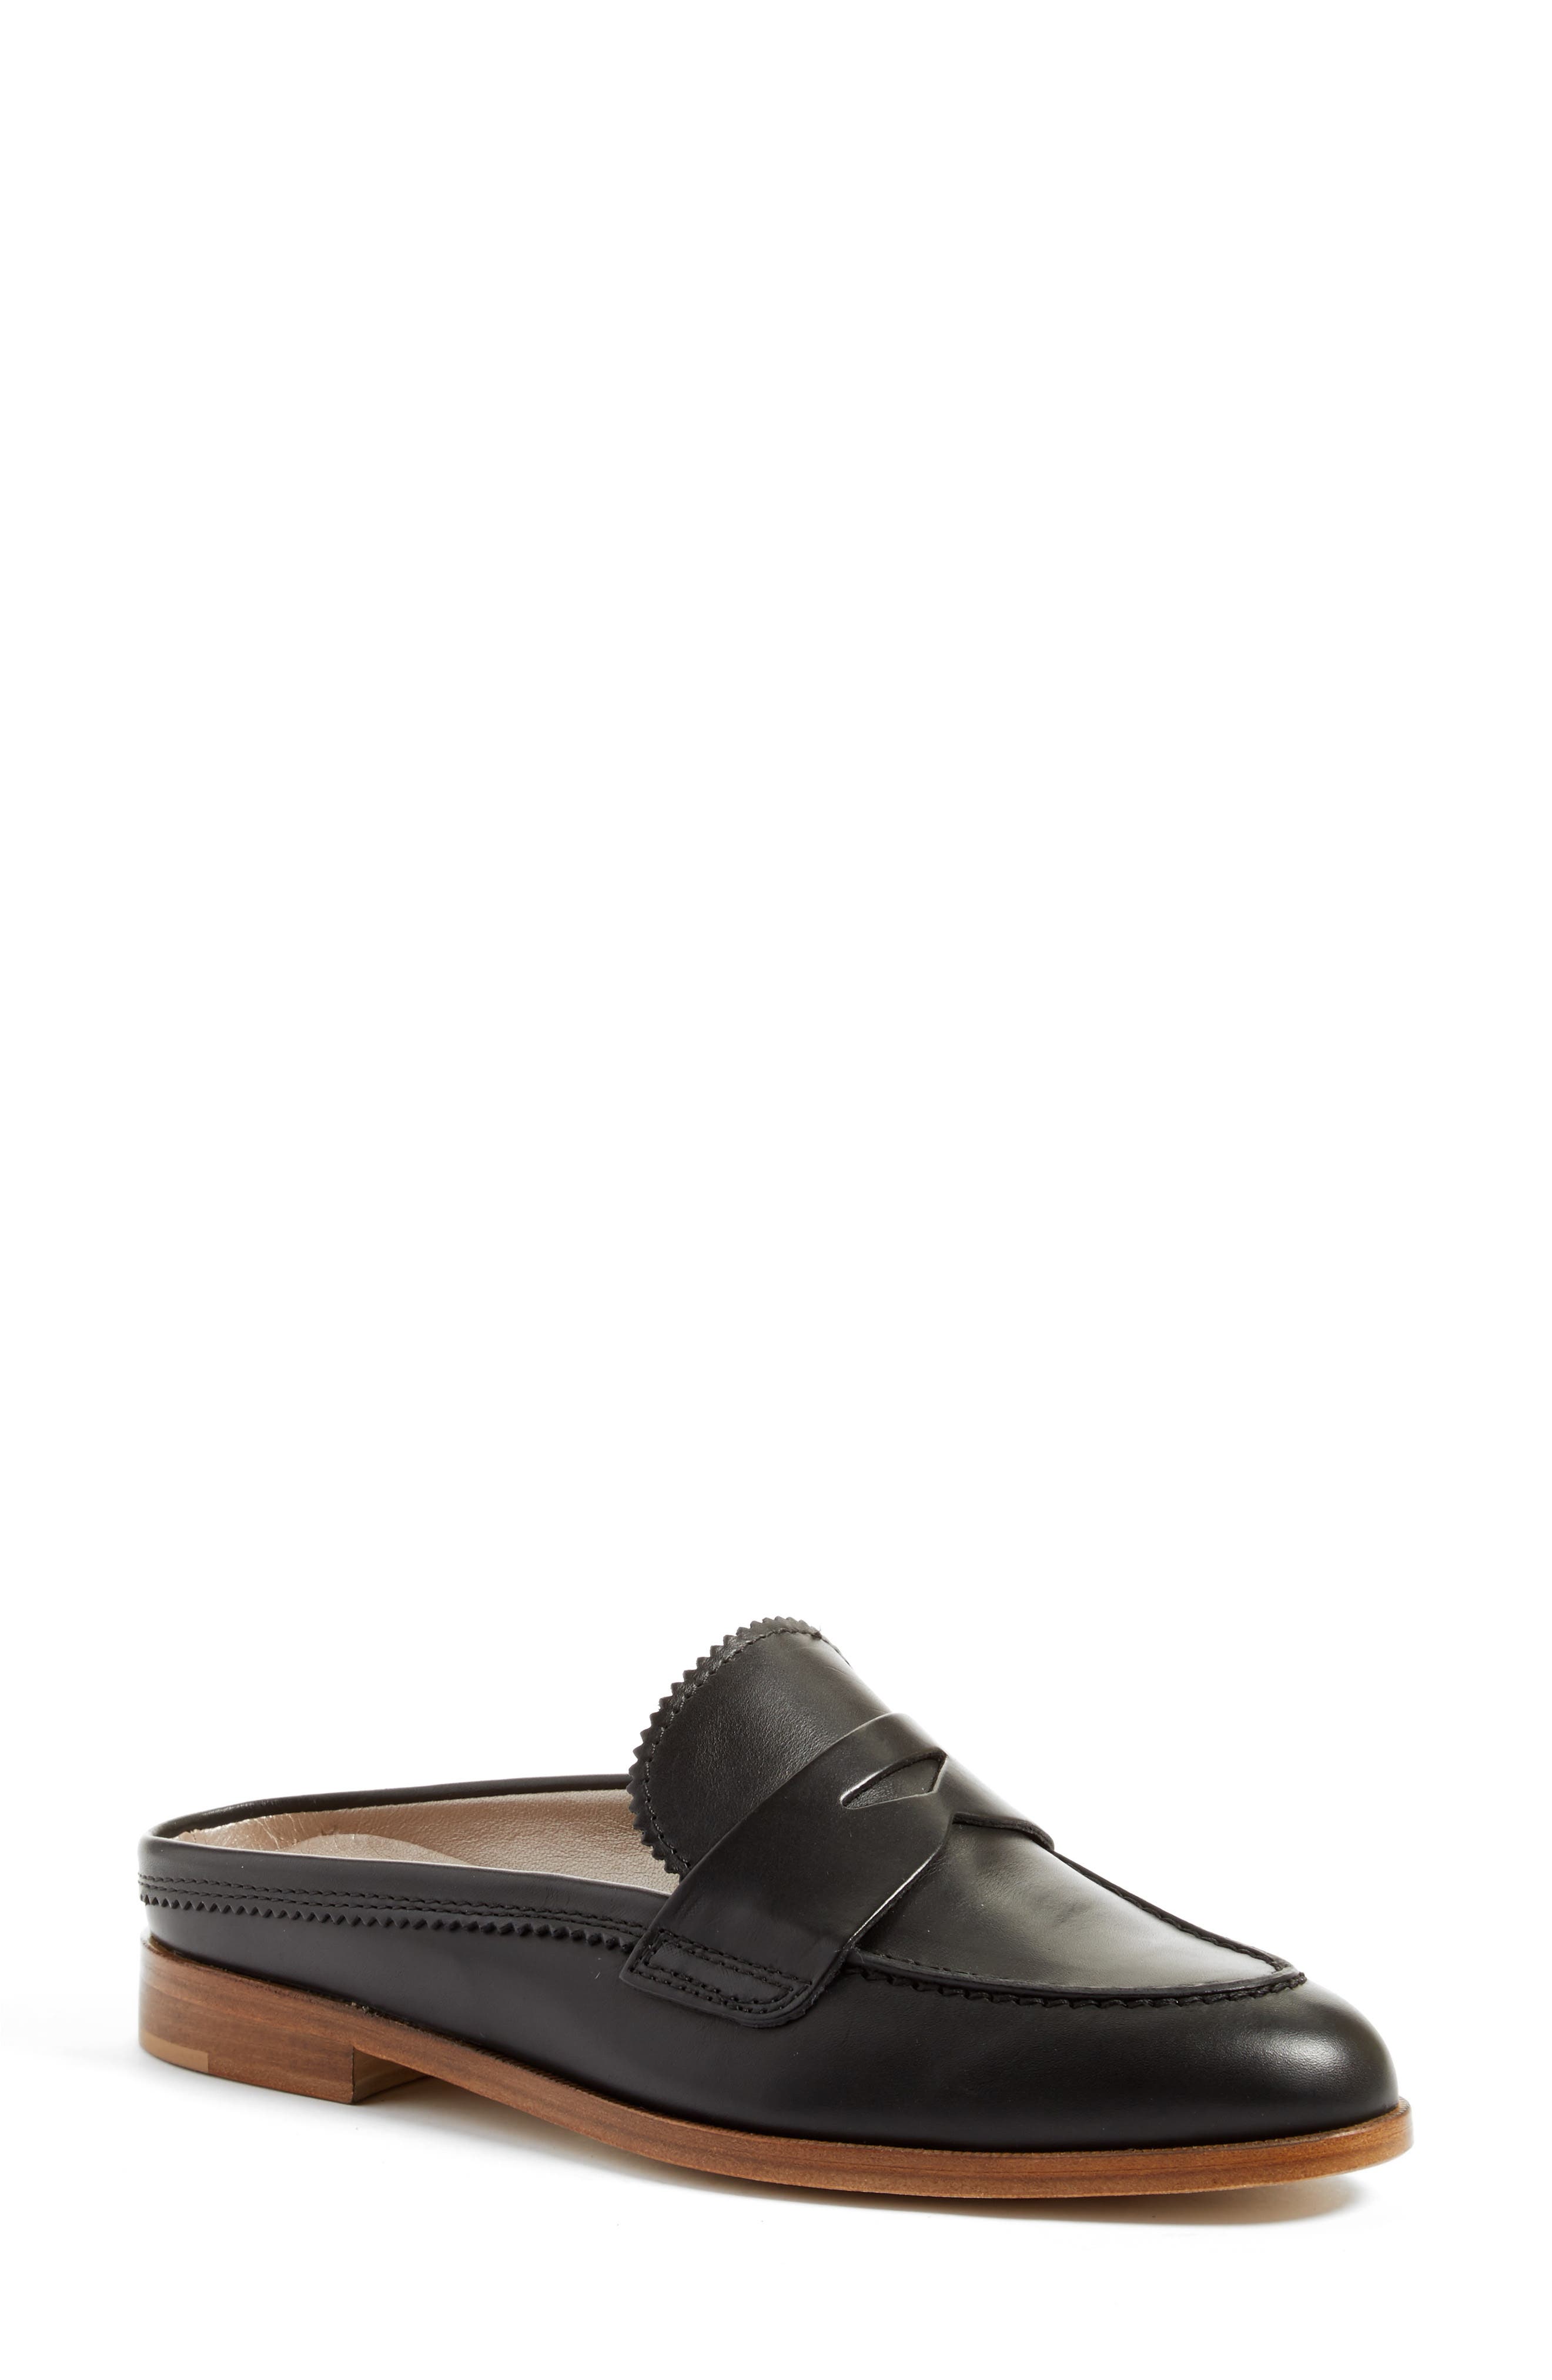 penny loafer mules